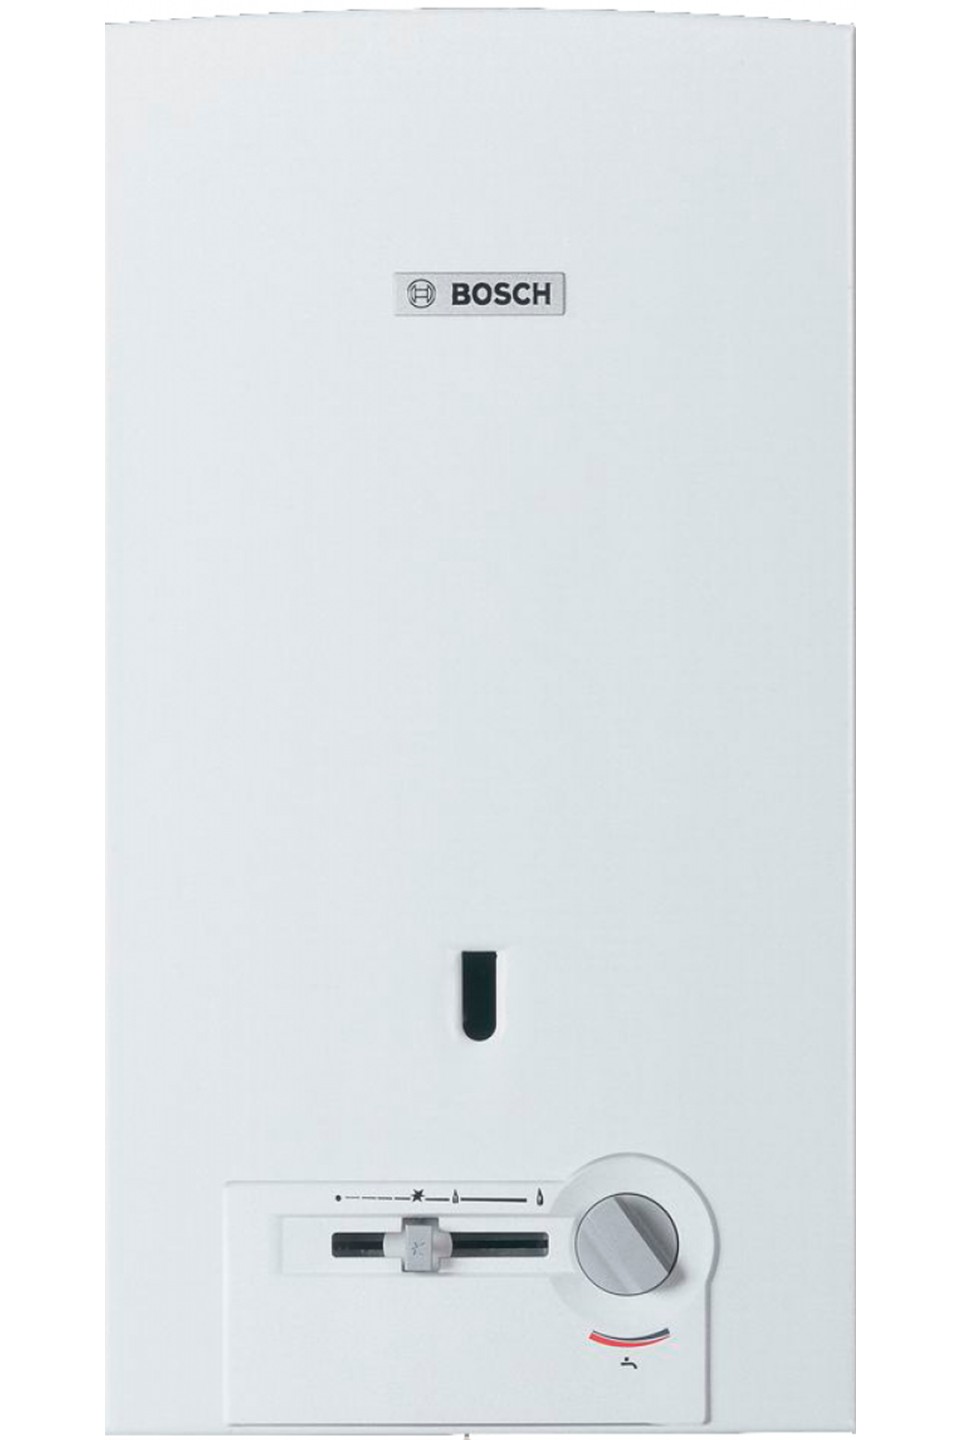 Bosch Therm 4000 O WR 13-2 P (7702331716)